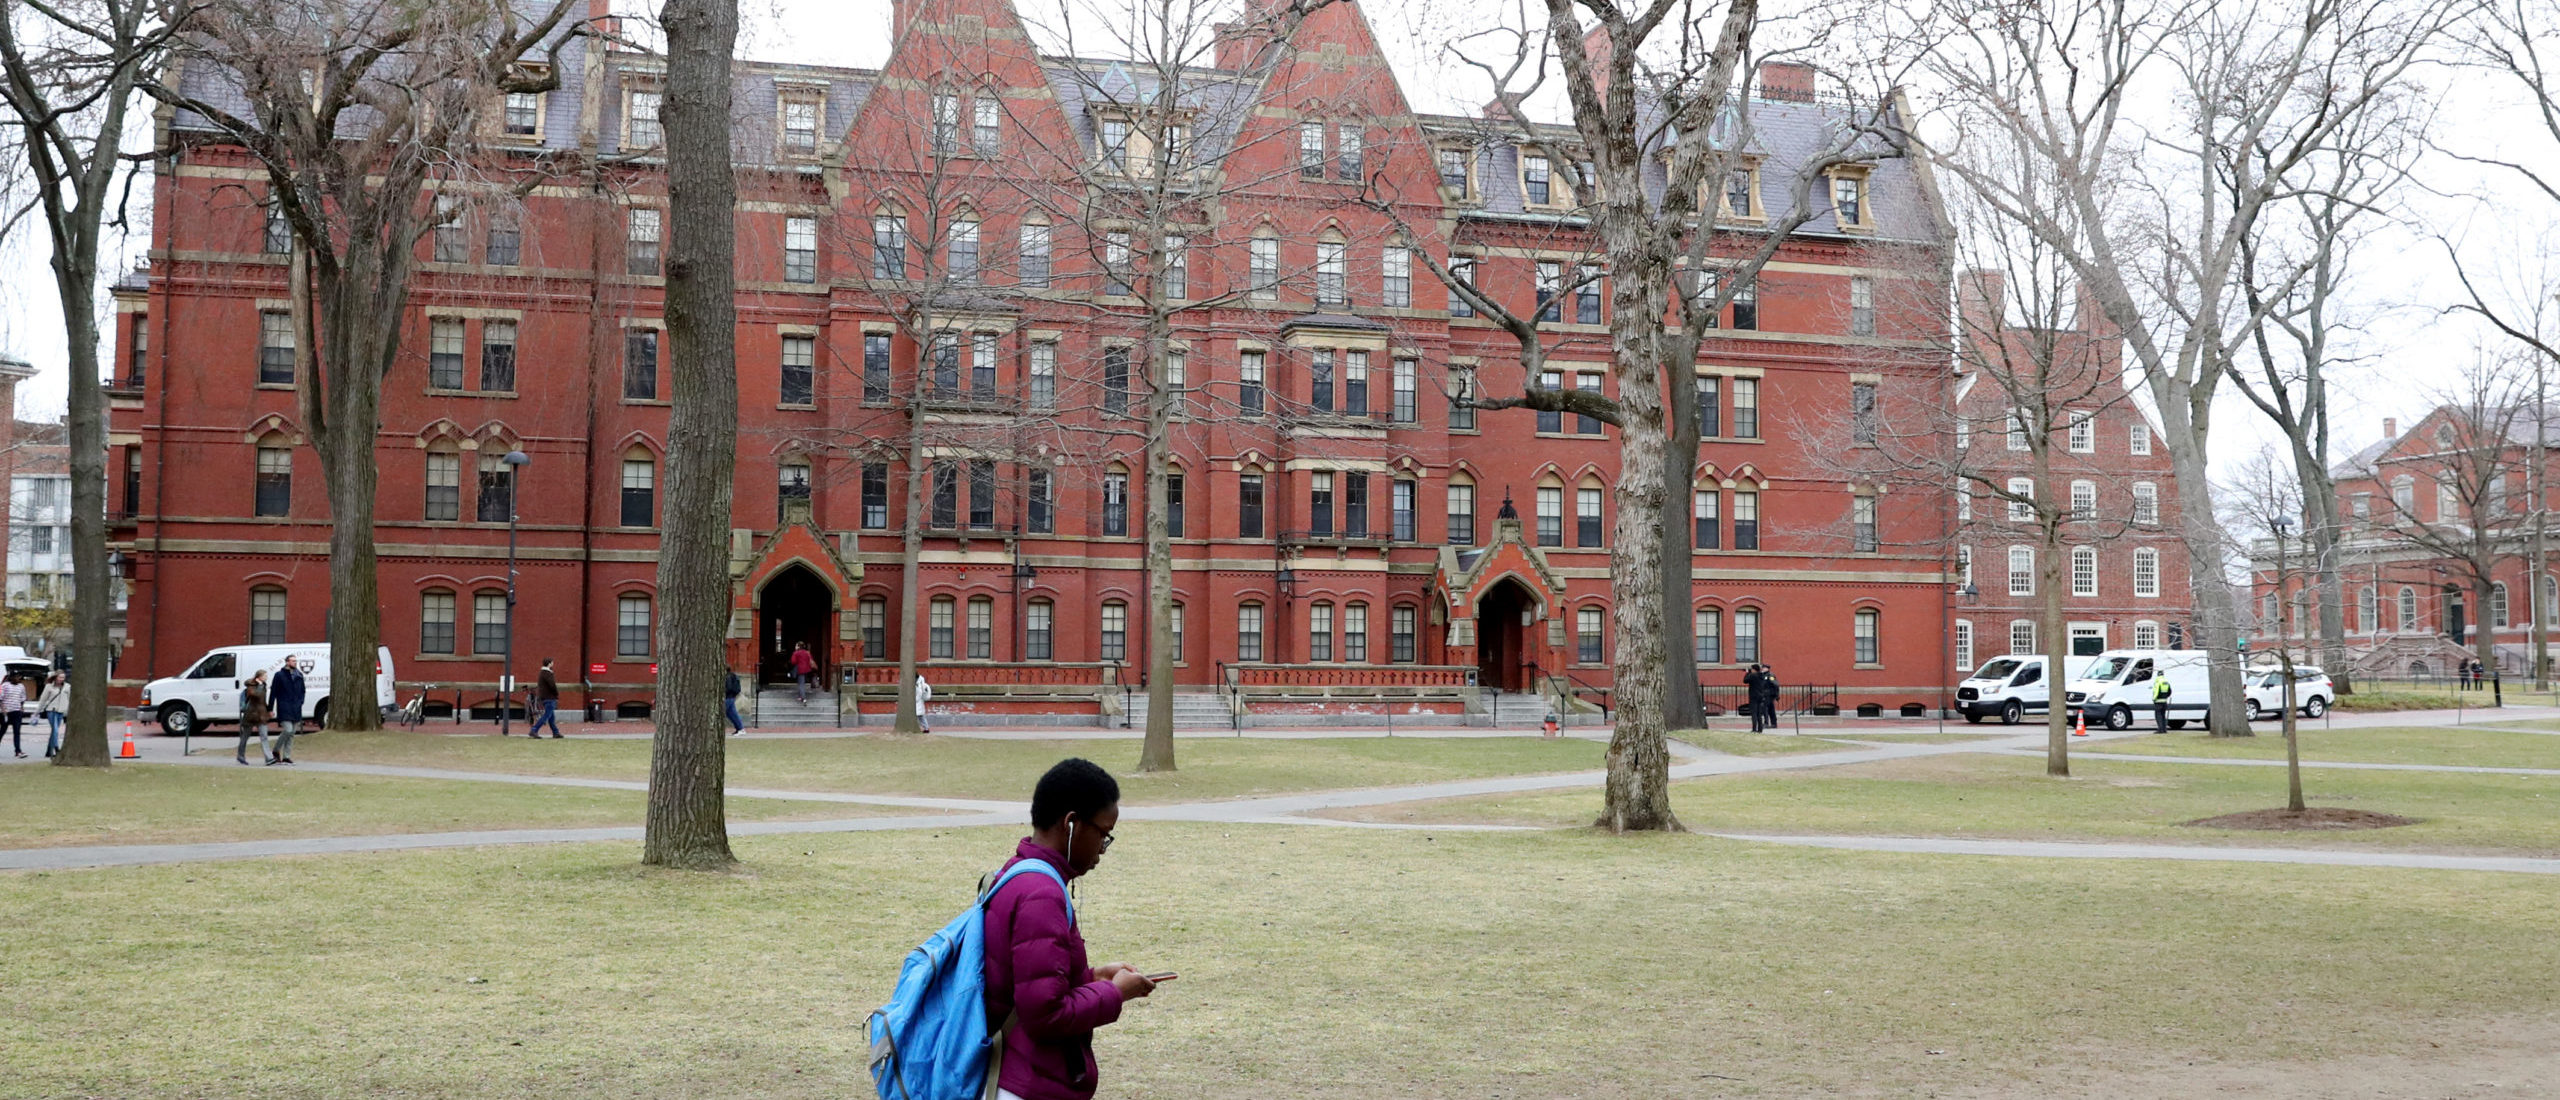 CAMBRIDGE, MASSACHUSETTS - MARCH 12: A student walks through Harvard Yard on the campus of Harvard University on March 12, 2020 in Cambridge, Massachusetts. Students have been asked to move out of their dorms by March 15 due to the Coronavirus (COVID-19) risk. All classes will be moved online for the rest of the spring semester. (Photo by Maddie Meyer/Getty Images)